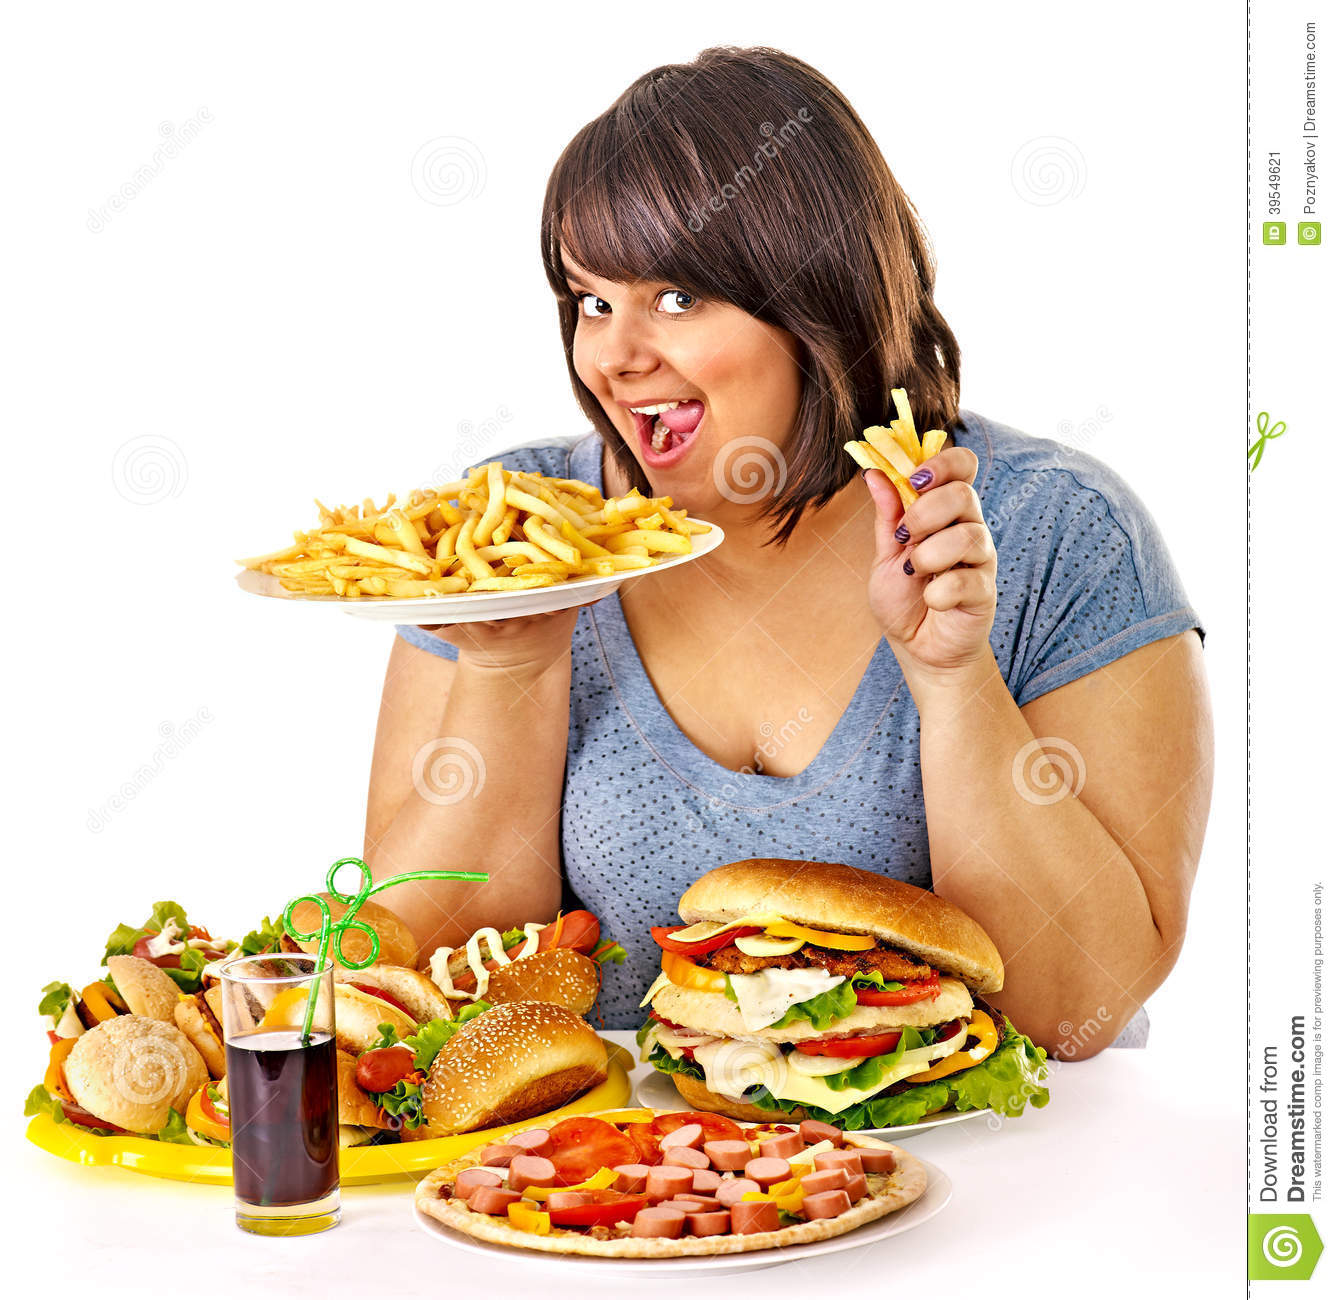 woman-eating-fast-food-overweight-39549621.jpg